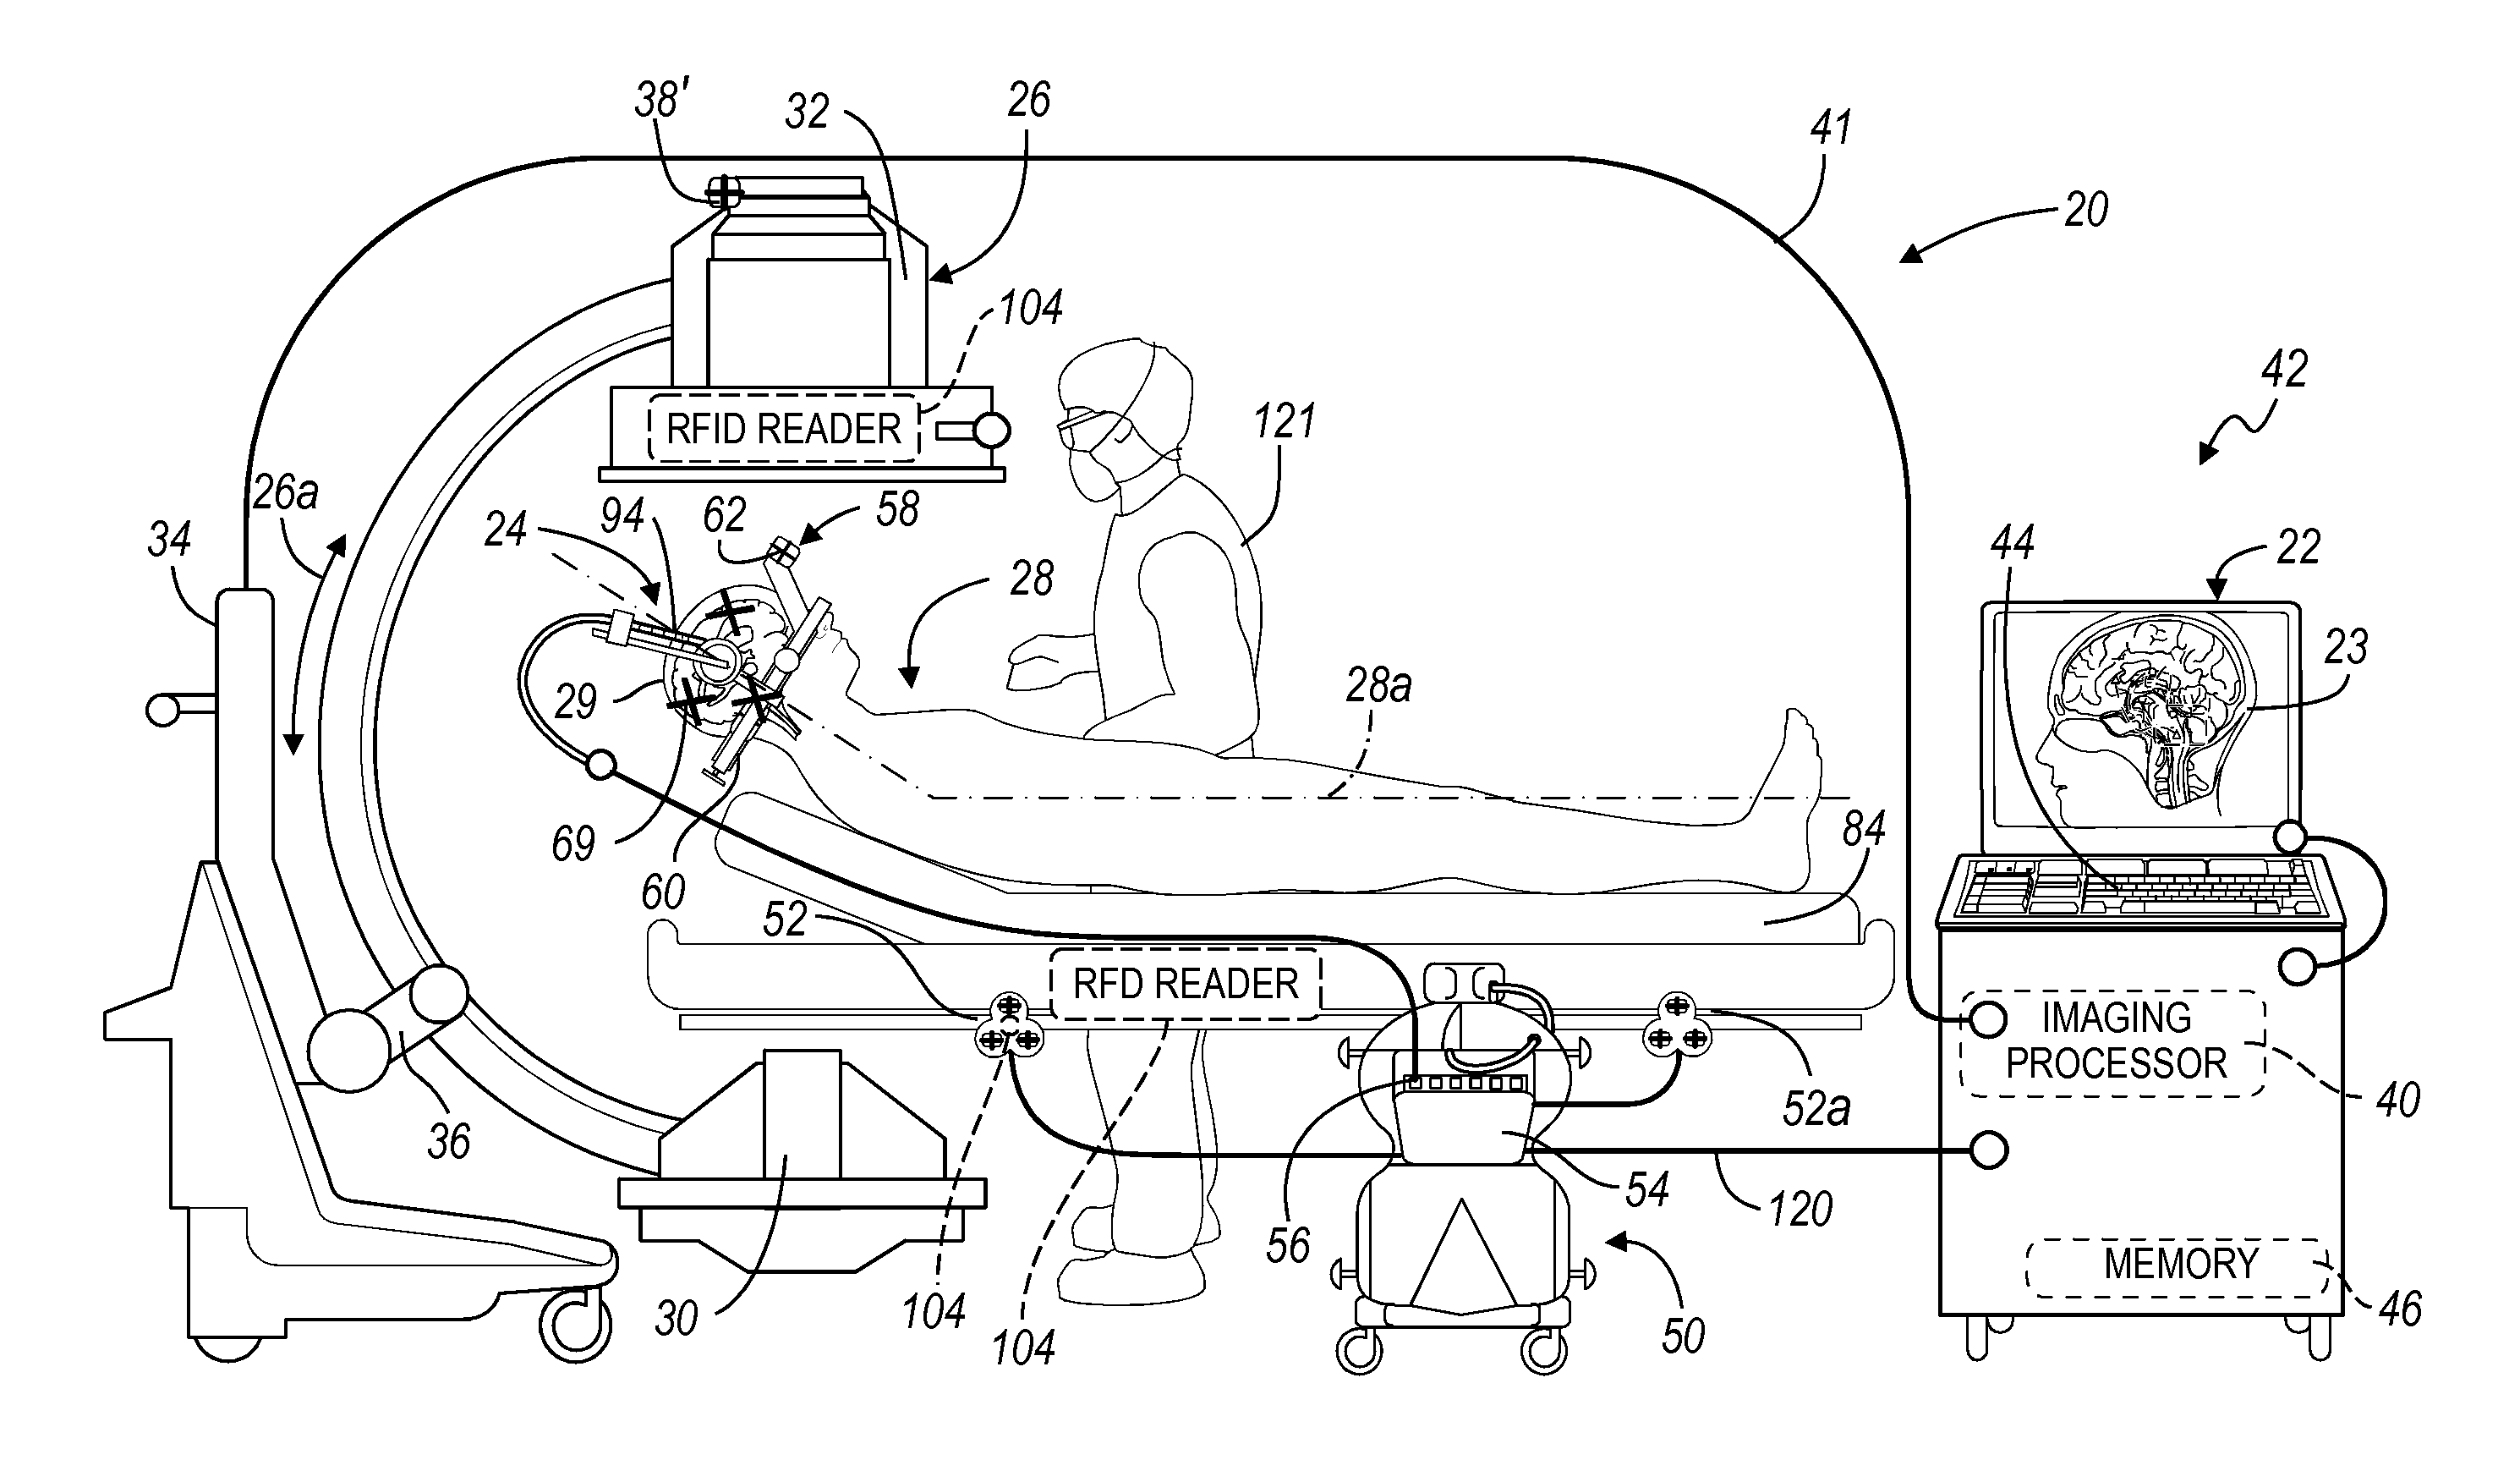 Automatic Identification Of Instruments Used With A Surgical Navigation System